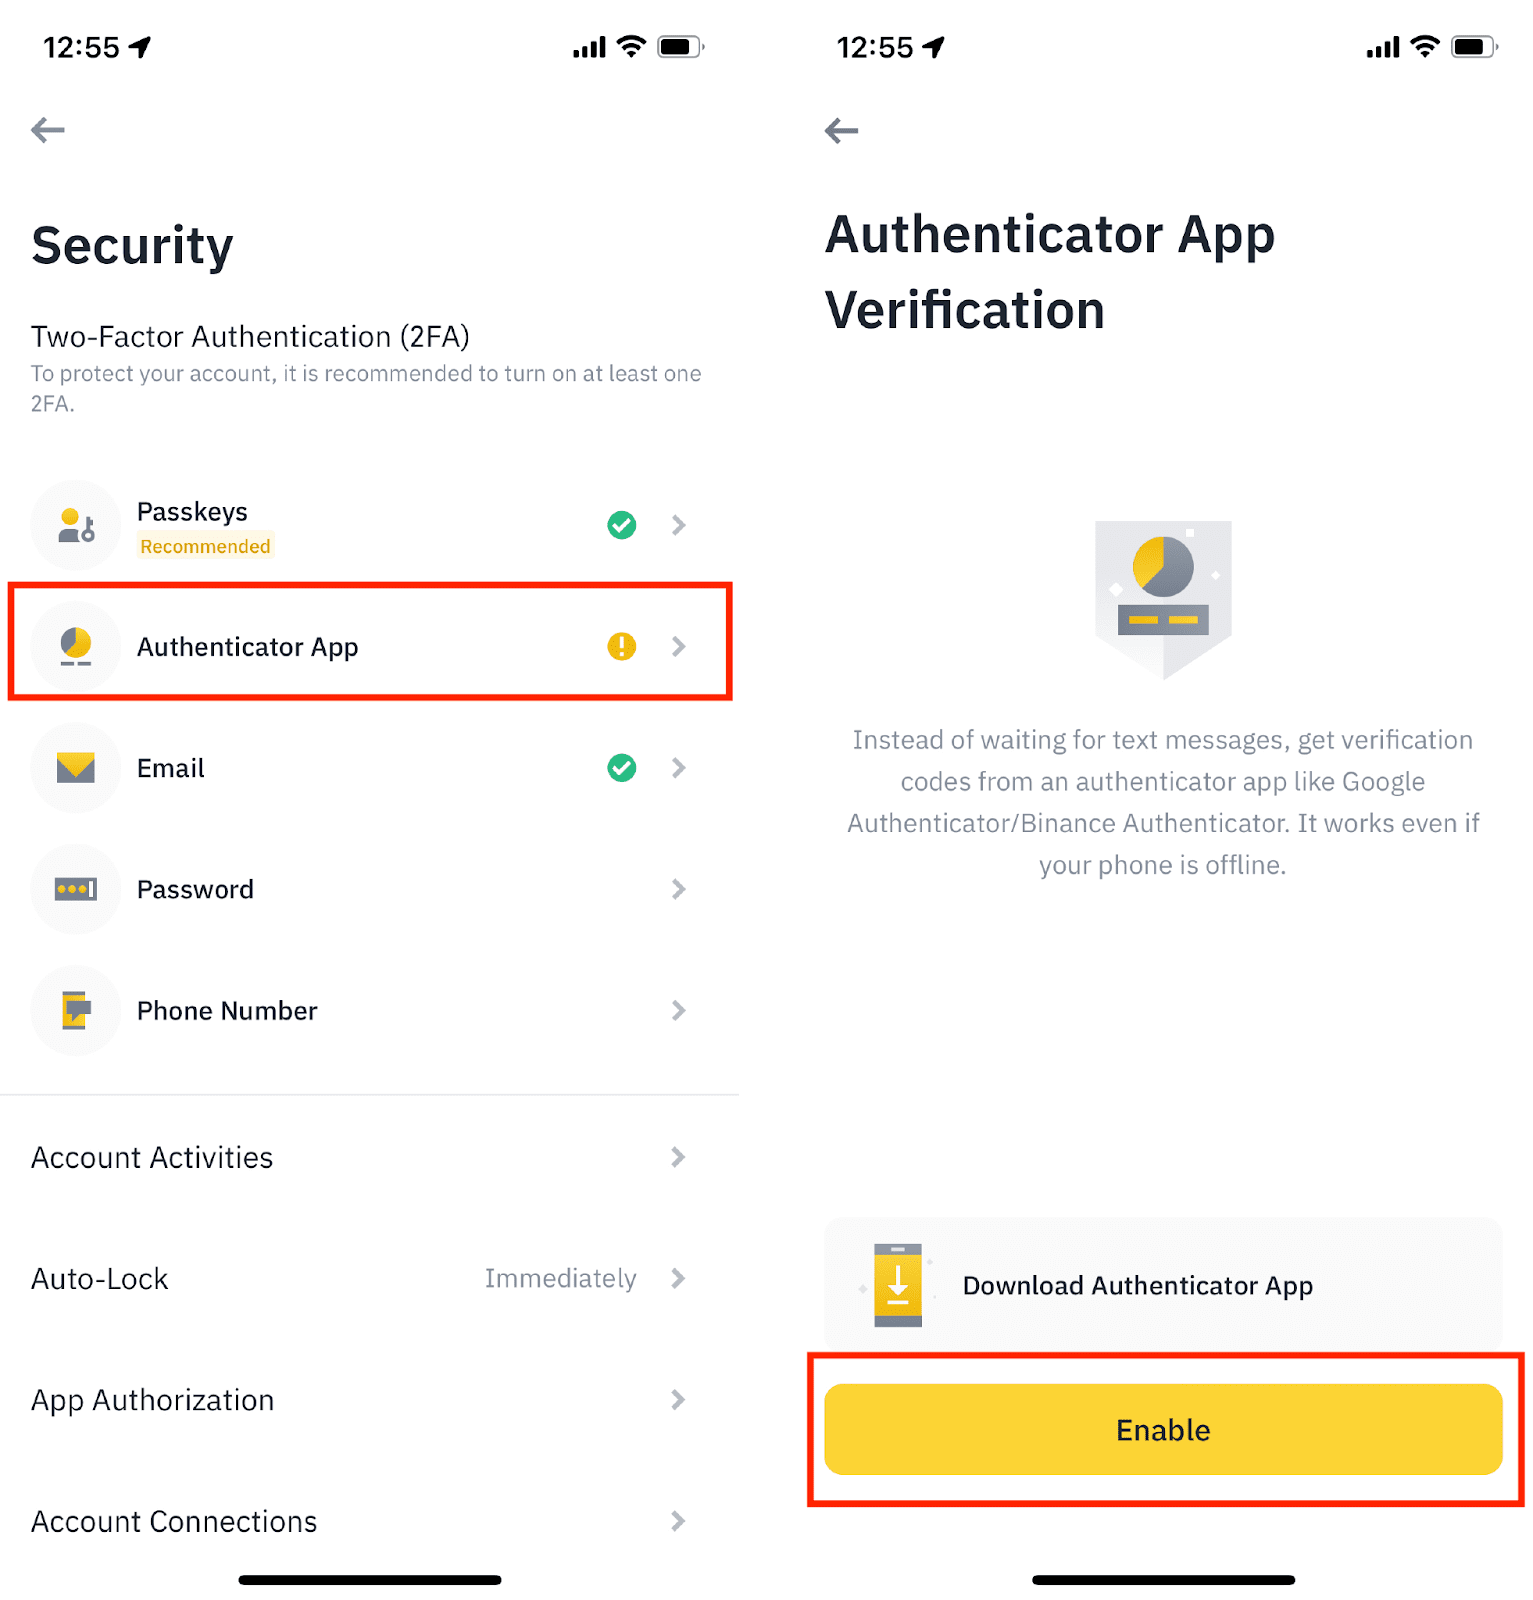 How to enable Two-Factor Authentication (2FA) for Binance